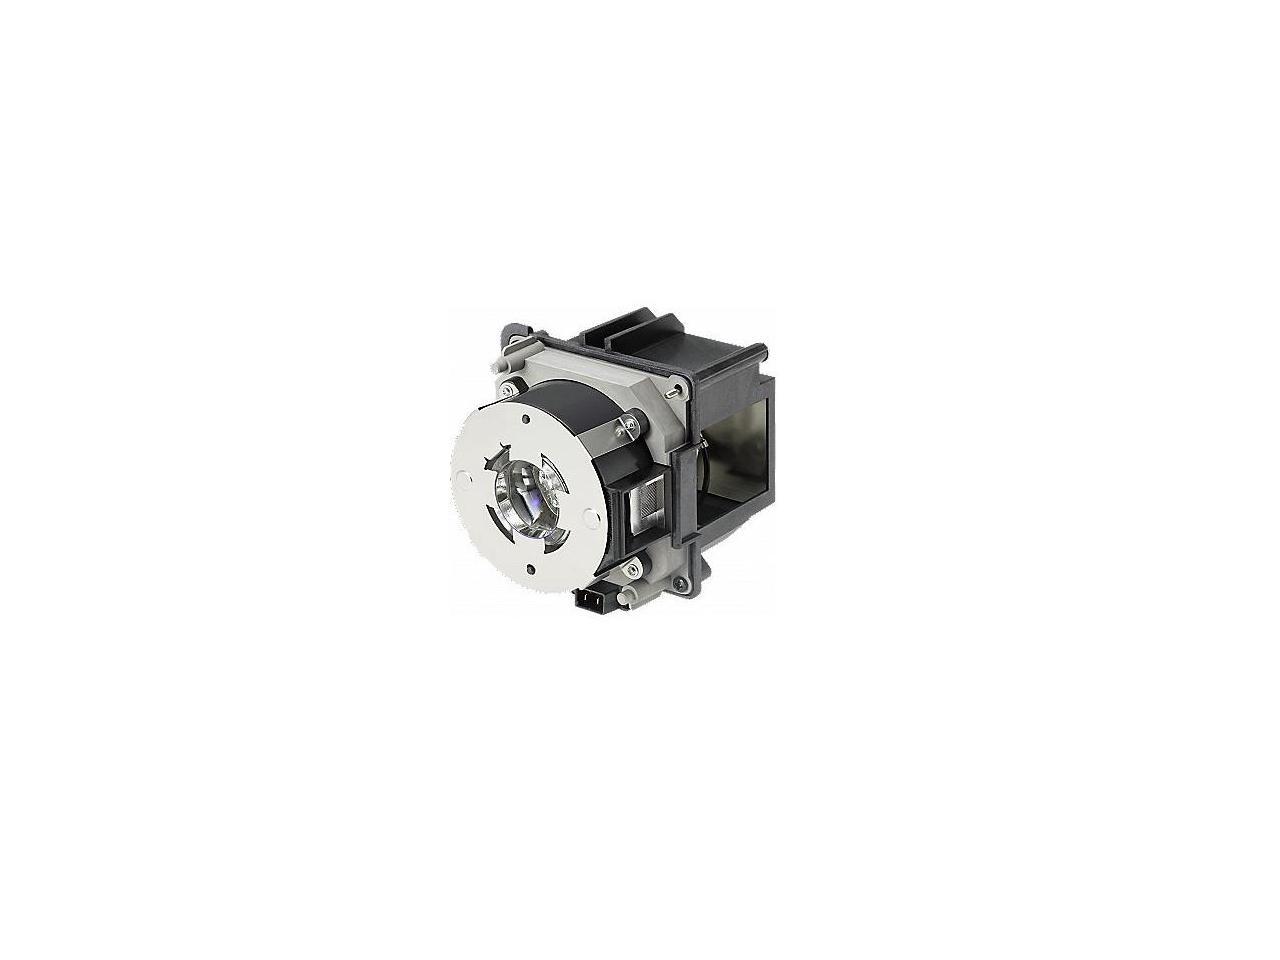 Epson ELPLP93 Replacement Projector Lamp / Bulb V13H010L93 - image 1 of 8